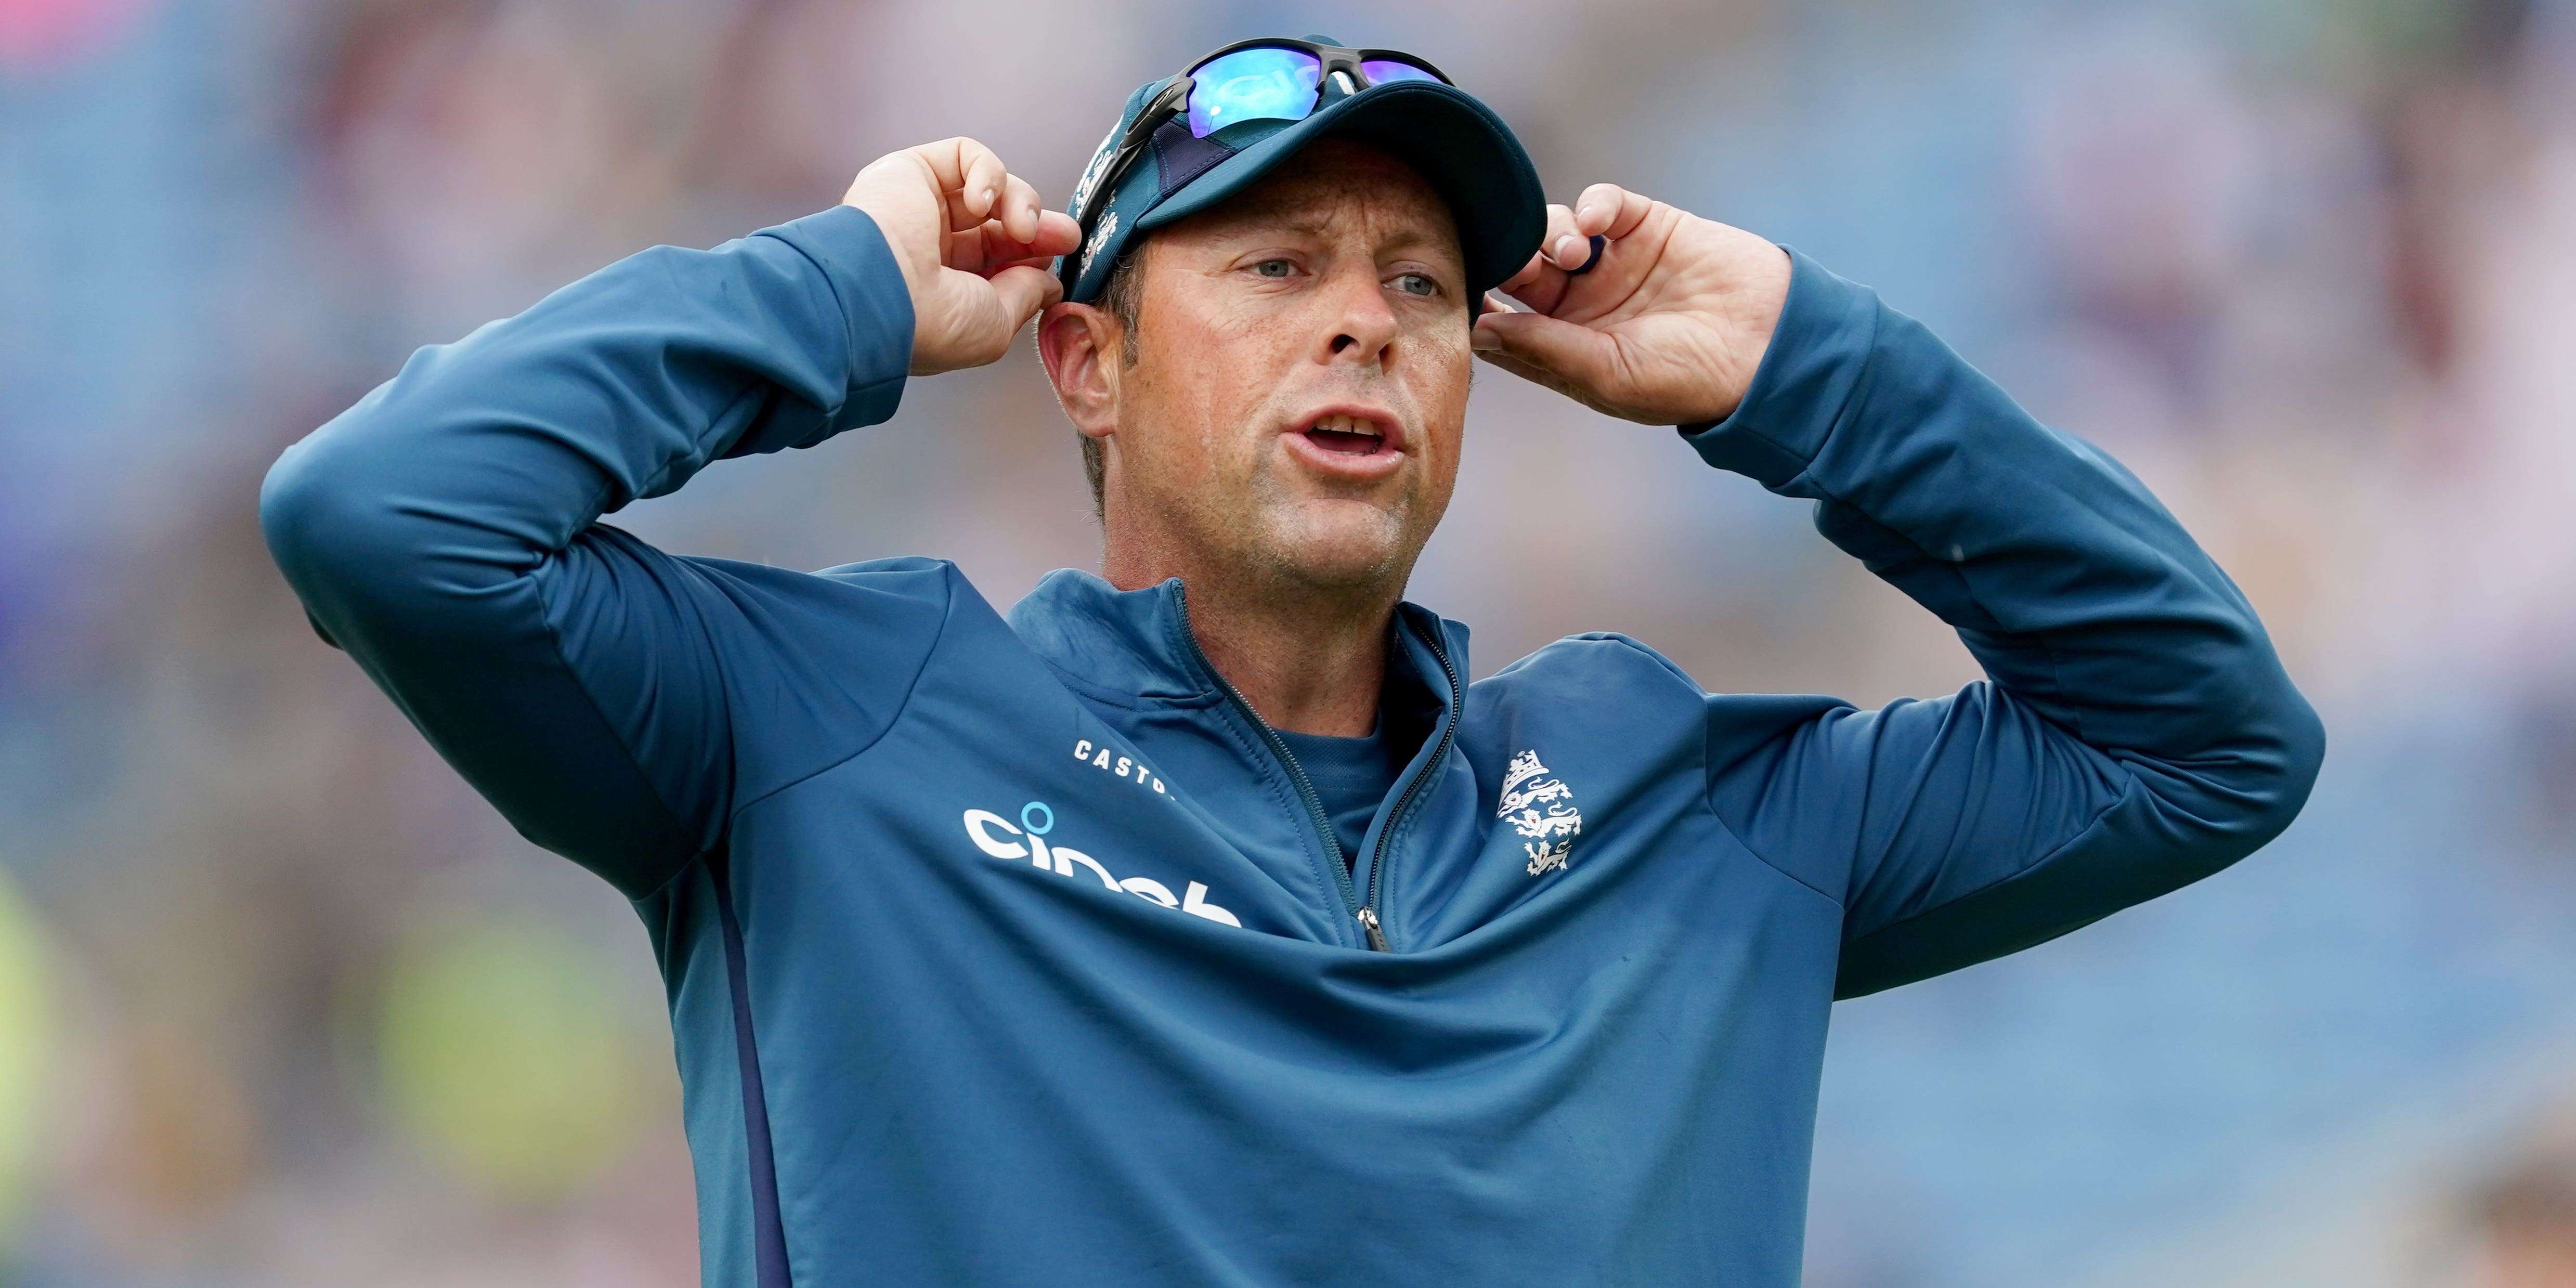 England's players all 'feeling the heat', says Marcus Trescothick